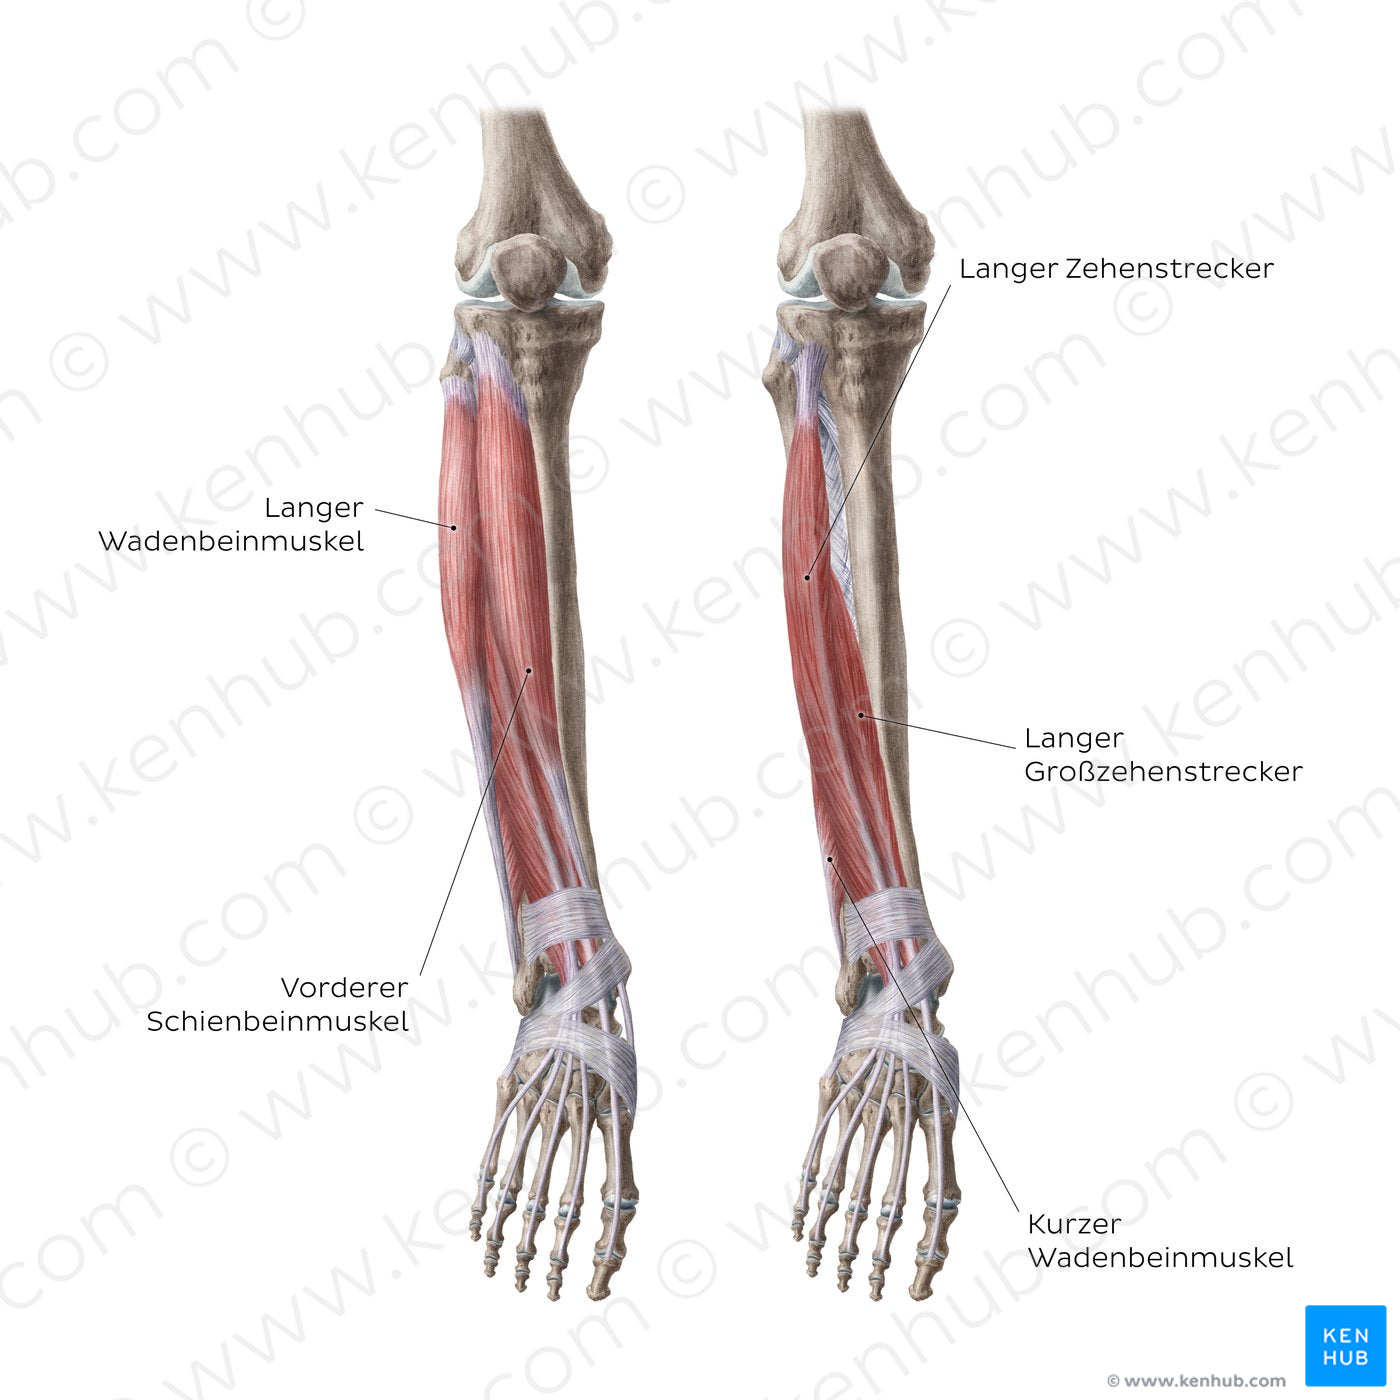 Muscles of the leg (Anterior view) (German)